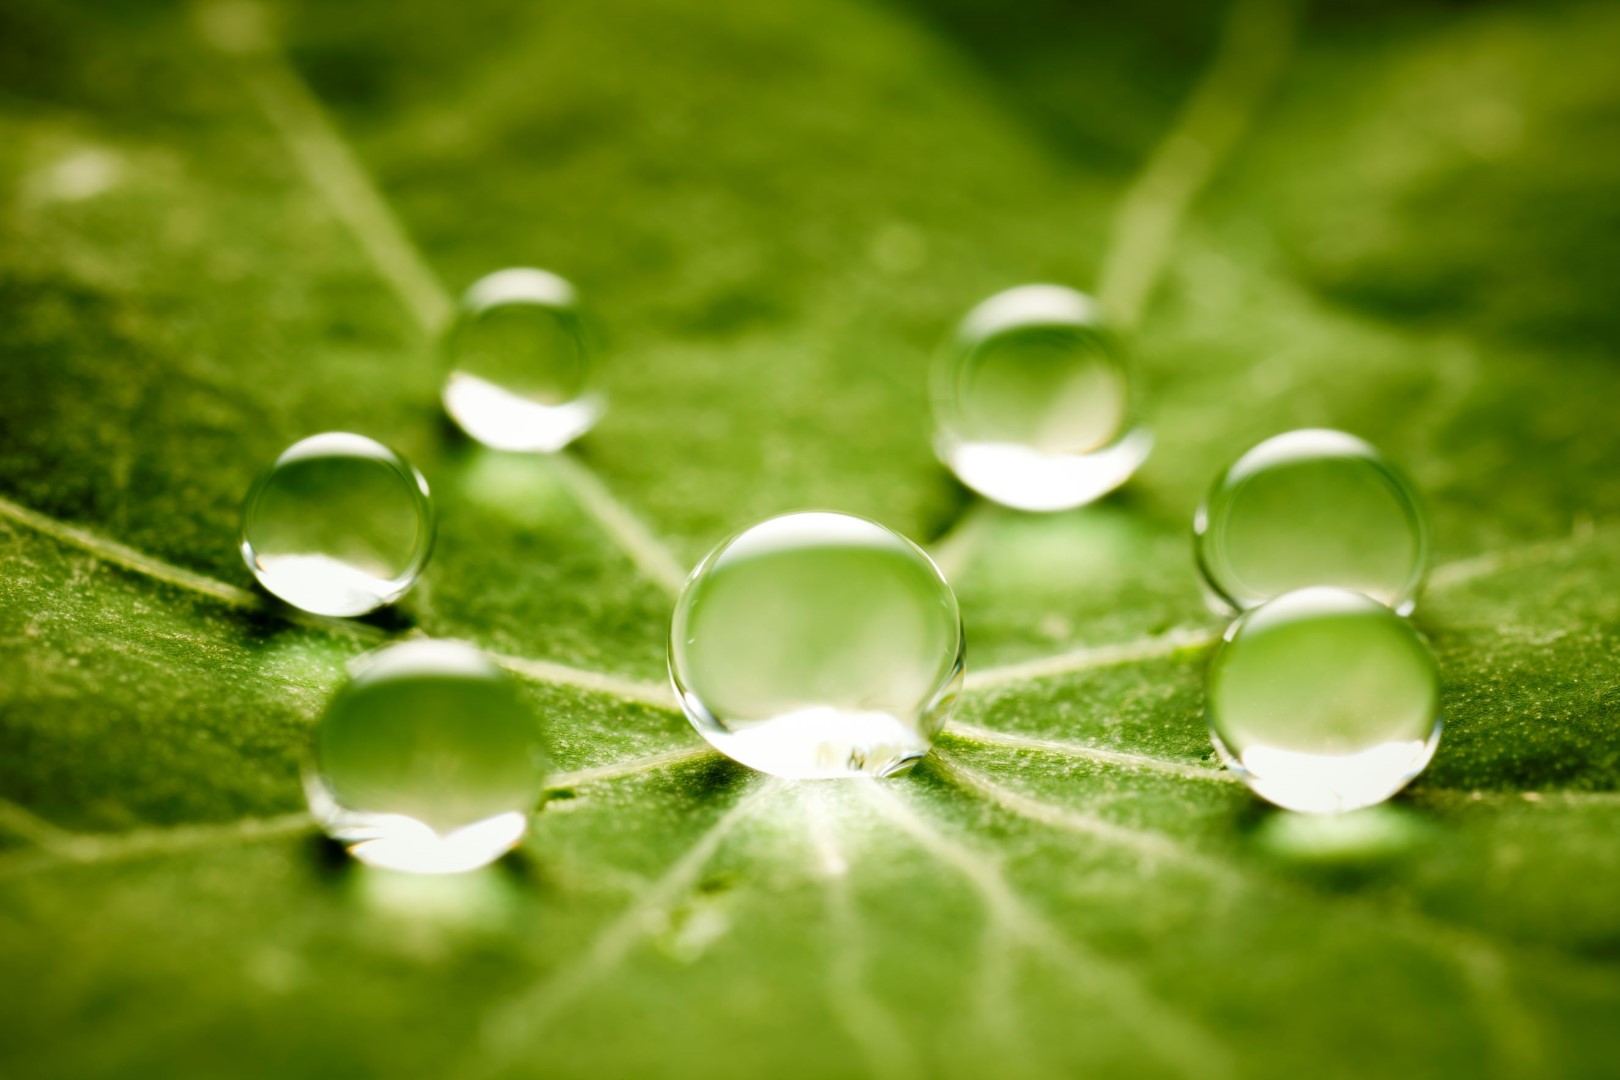 Water droplets resting on a green leaf